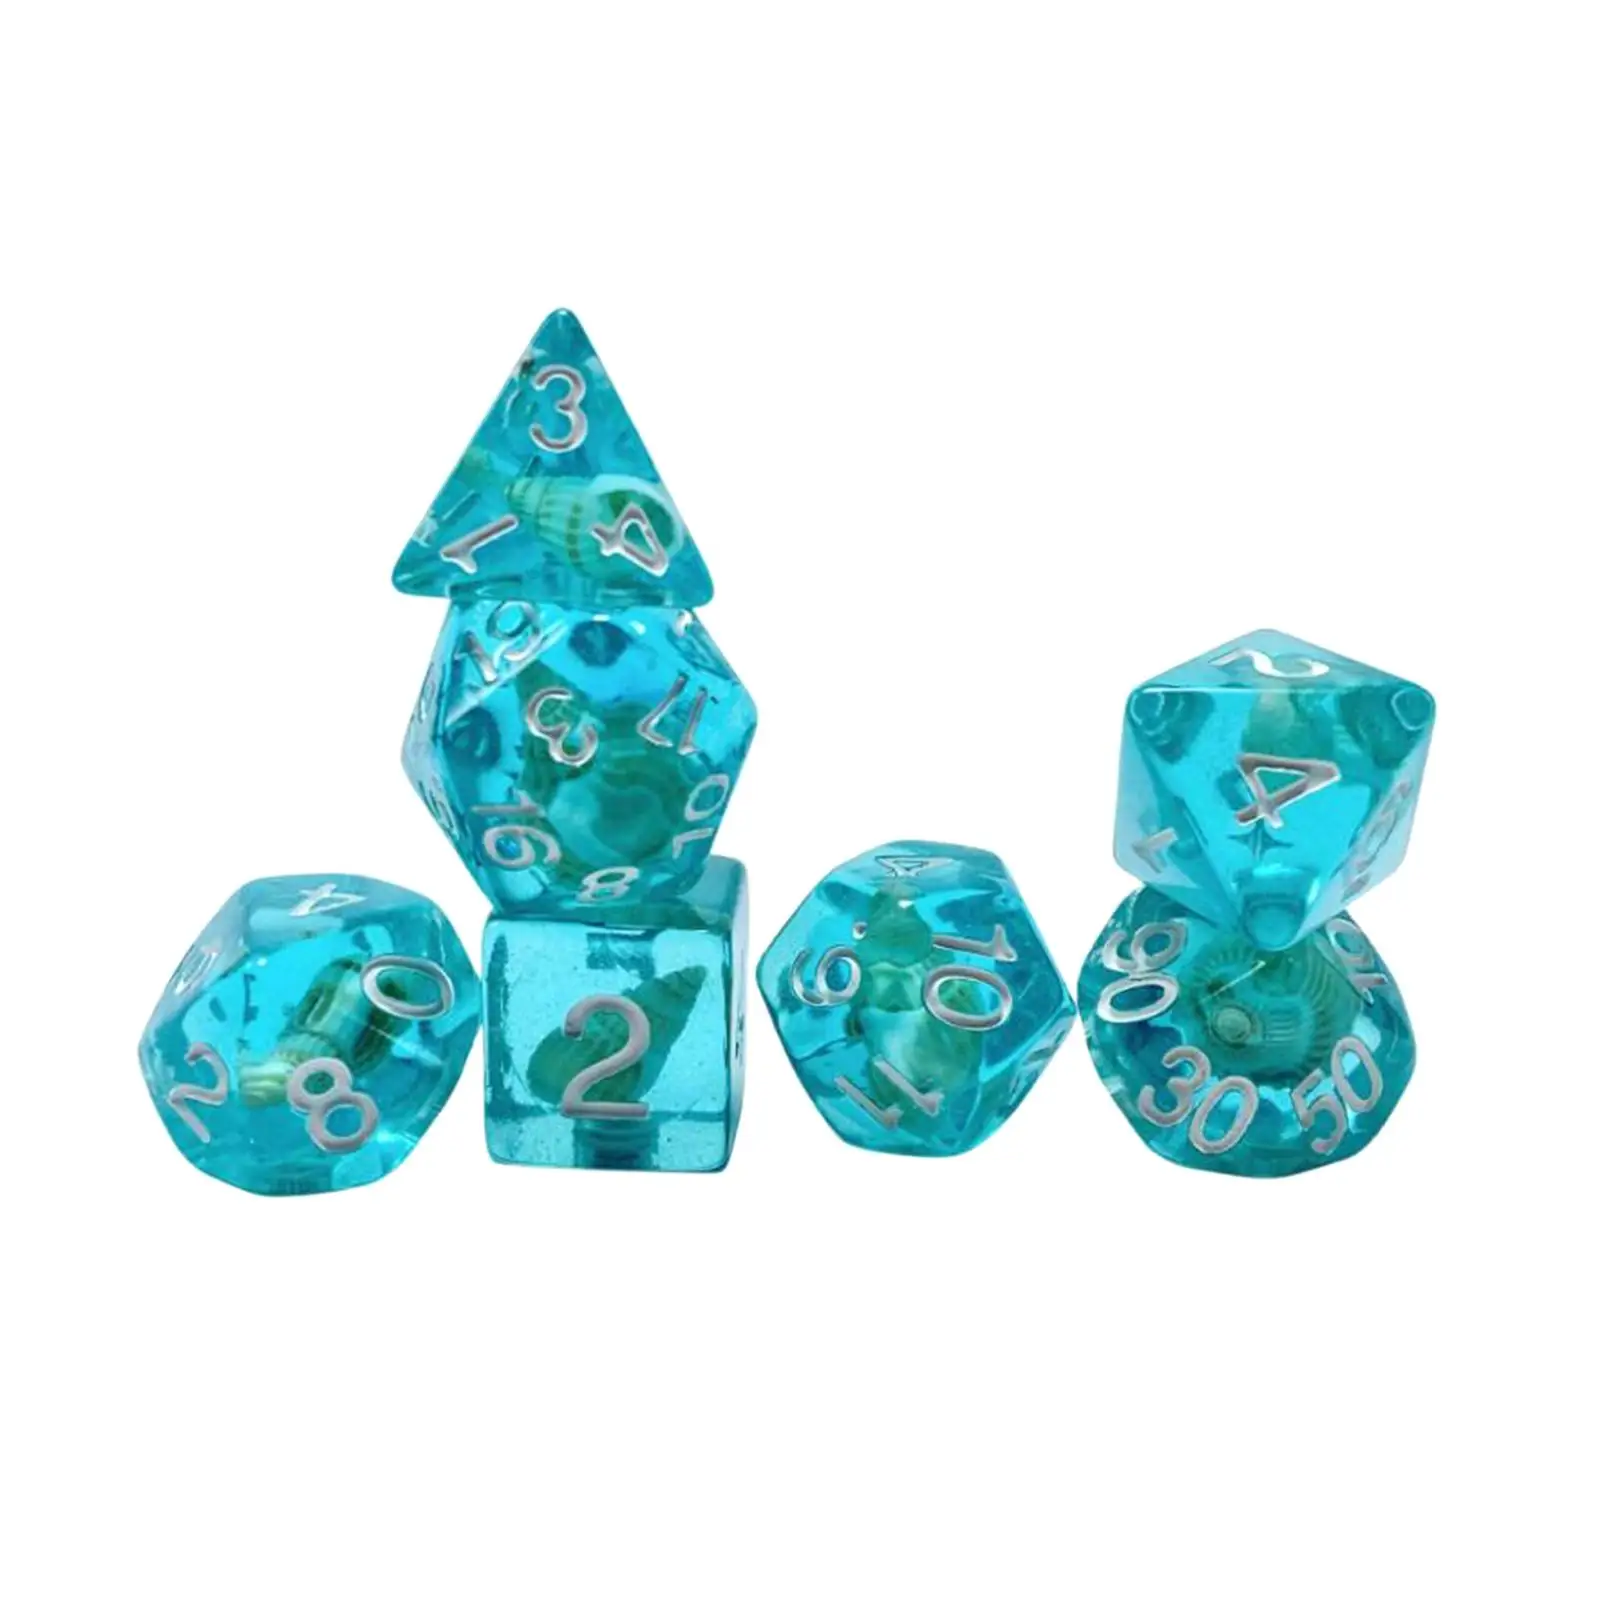 7 Pieces Polyhedral Dices Set D4 D8 D10 D12 D20 Playing Dices Role Playing Game Dices Translucent Teal for Card Game Card Games